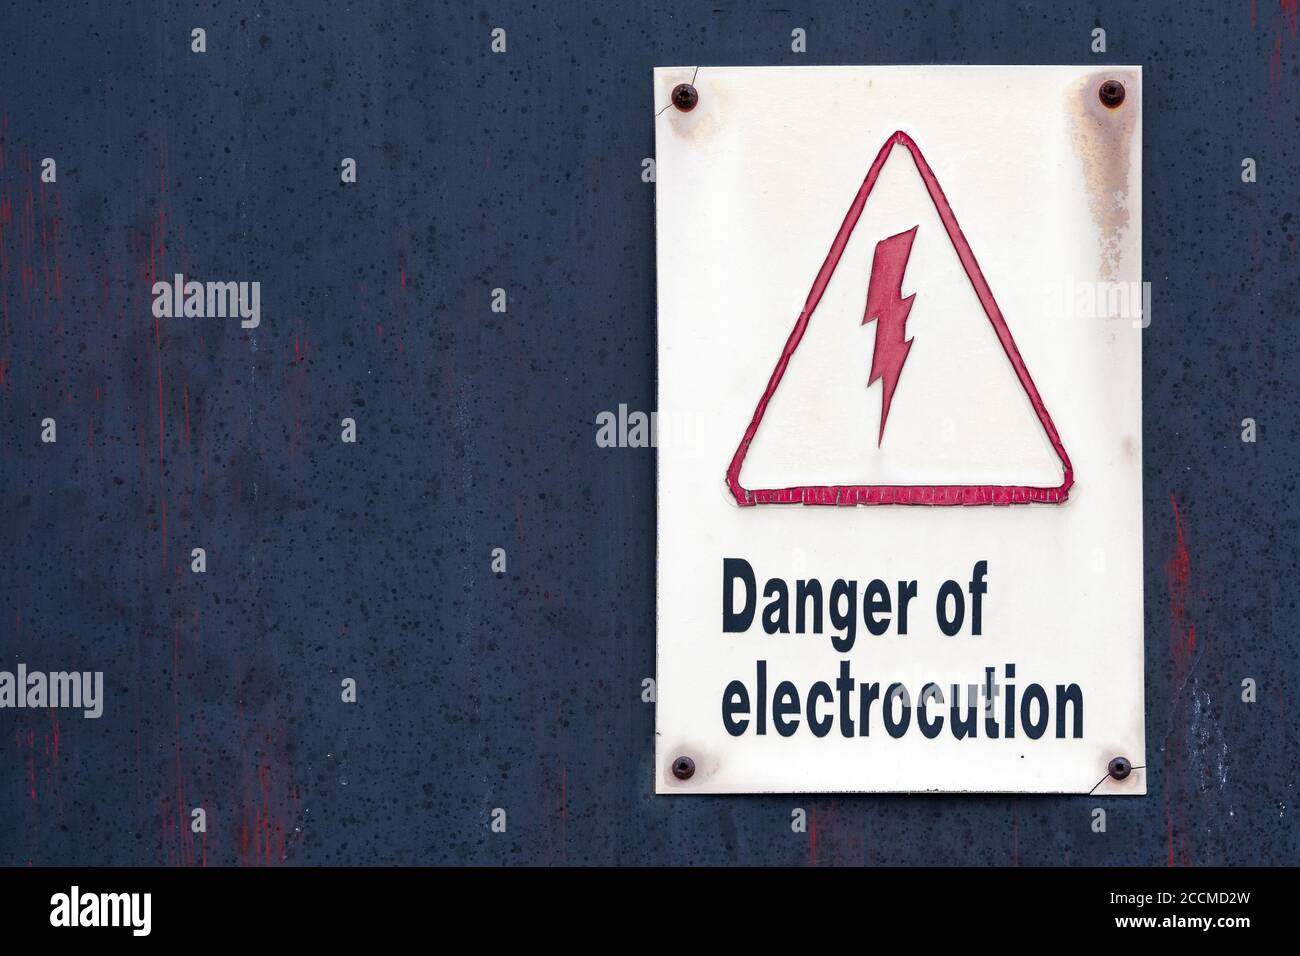 A sign that reads 'Danger of electrocution'. The sign is old and faded. It is on the front of an old black metal door. Stock Photo